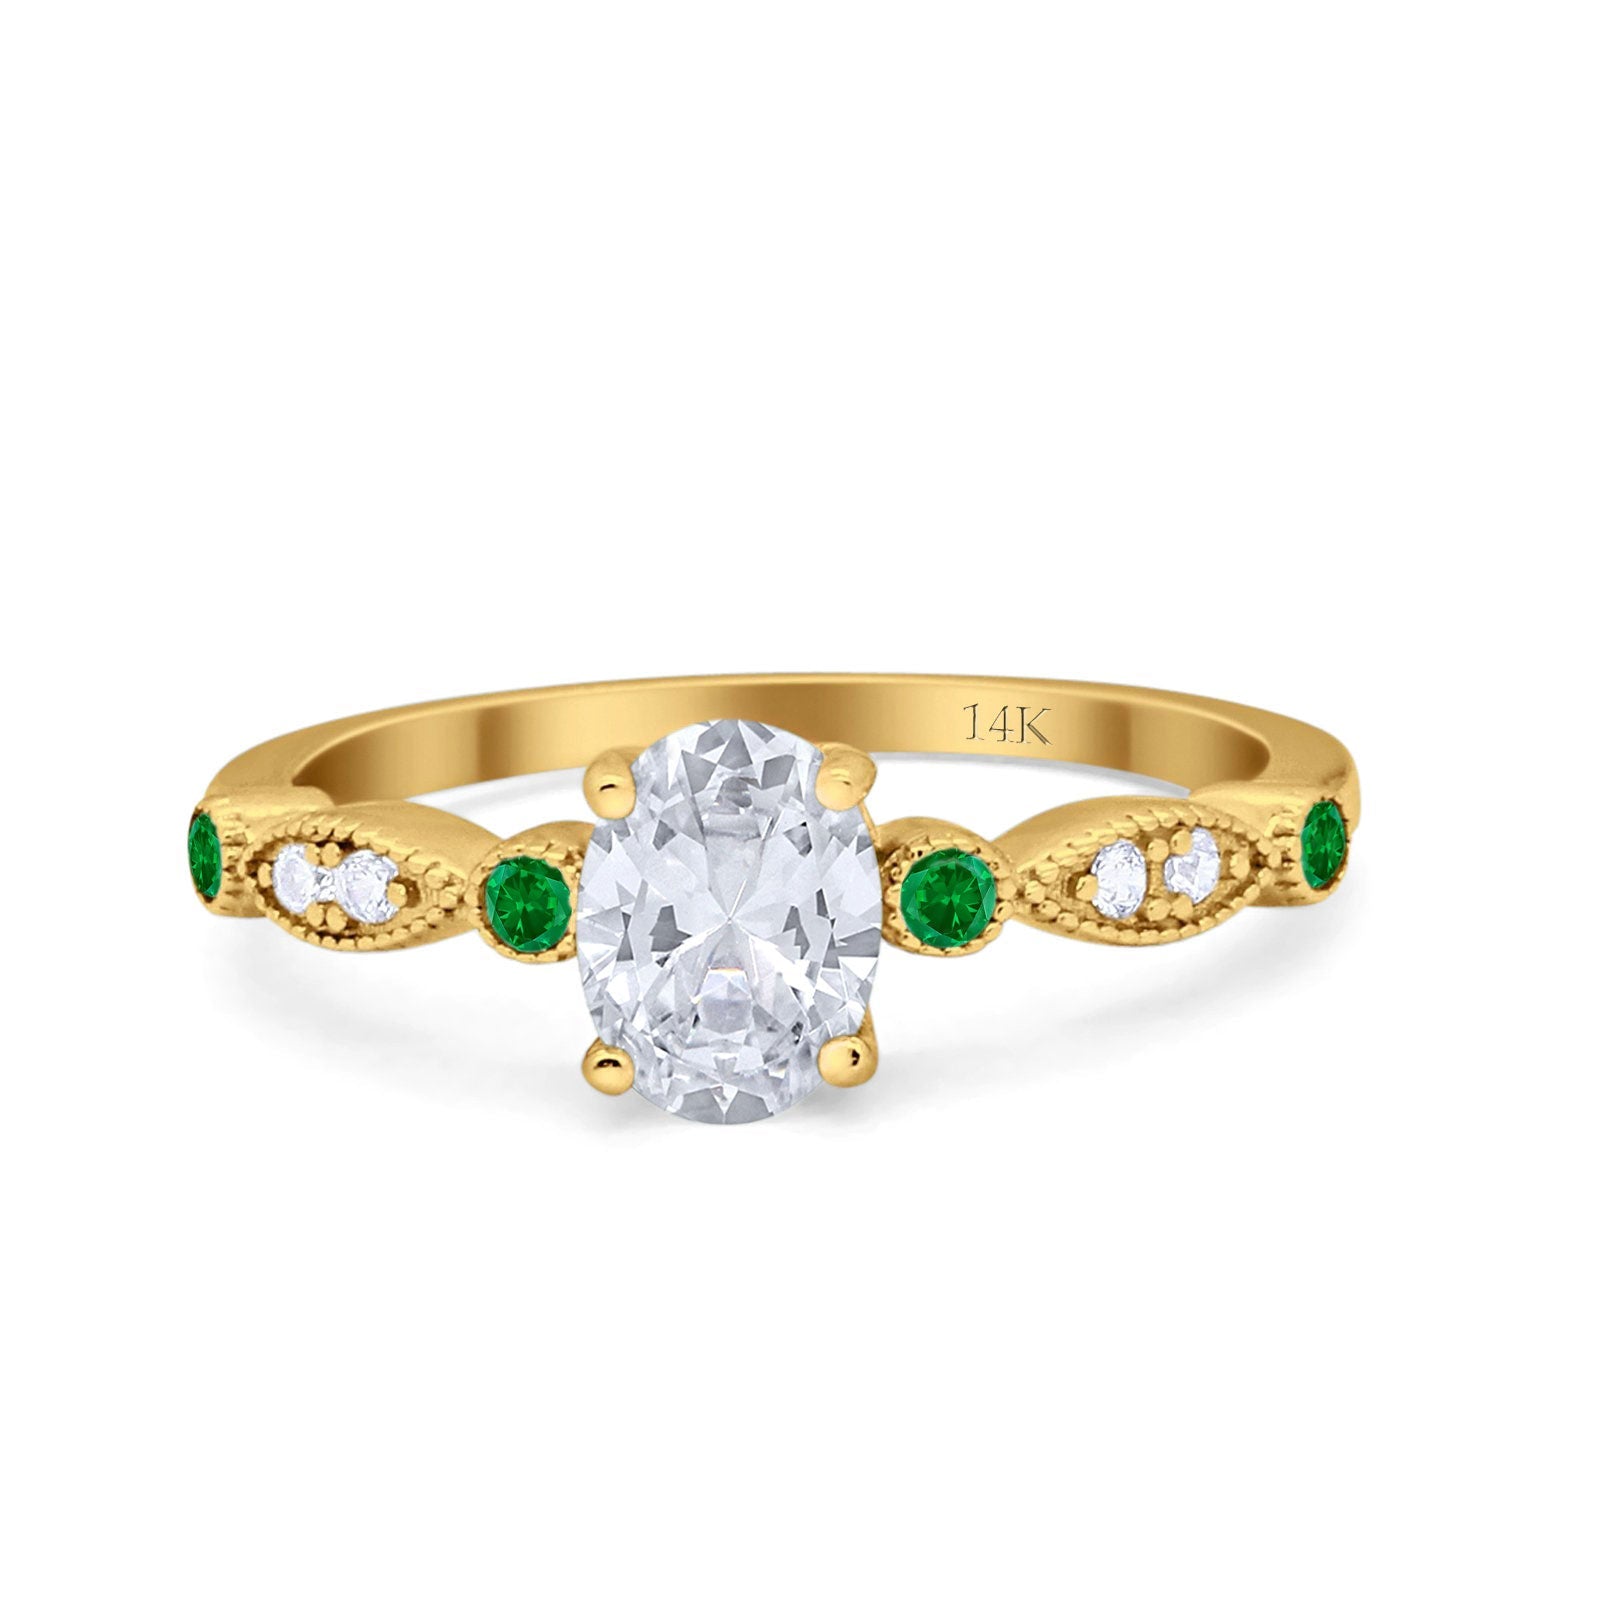 14K Gold Vintage Style Oval Shape Bridal Green Emerald Simulated Cubic Zirconia Wedding Engagement Ring